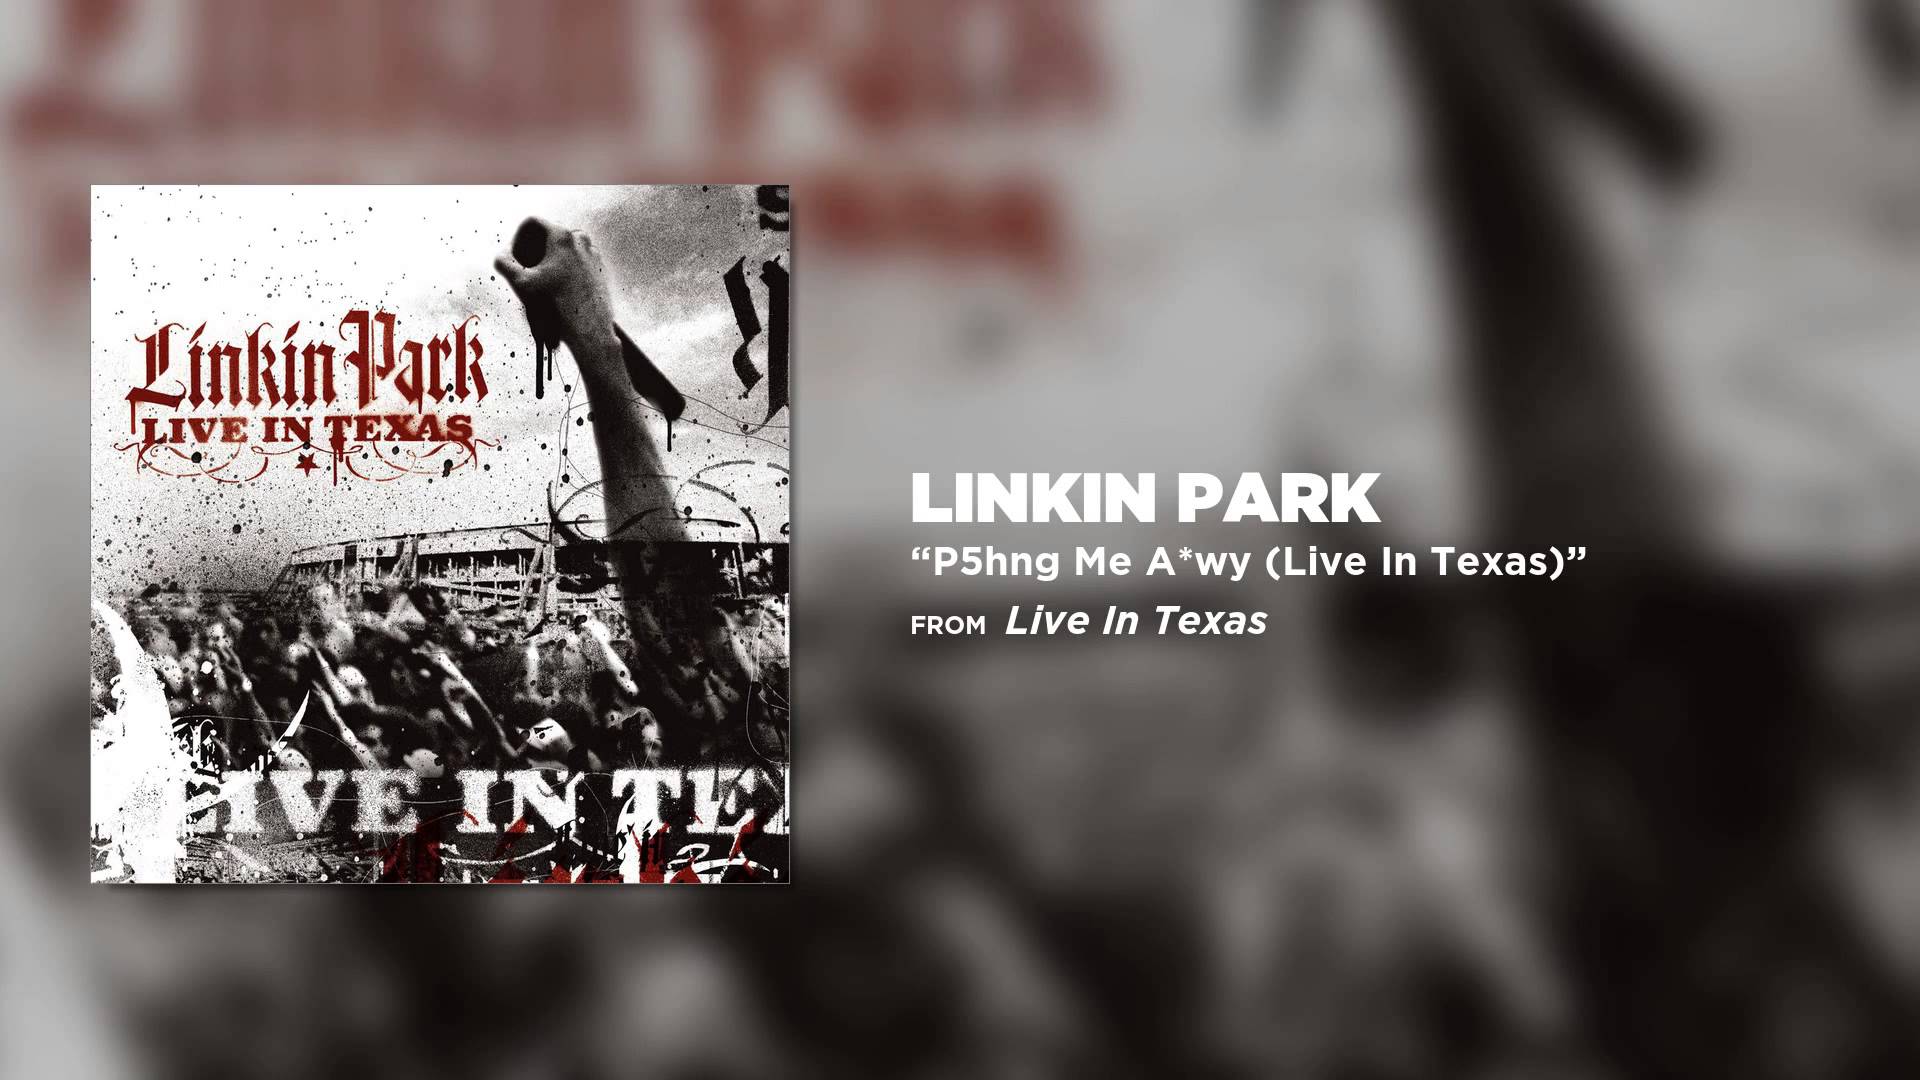 Linkin park one step closer. Linkin Park Runaway. Linkin Park Numb (Live in Texas). From the inside Linkin Park обложка. Linkin Park Live in Texas обложка.